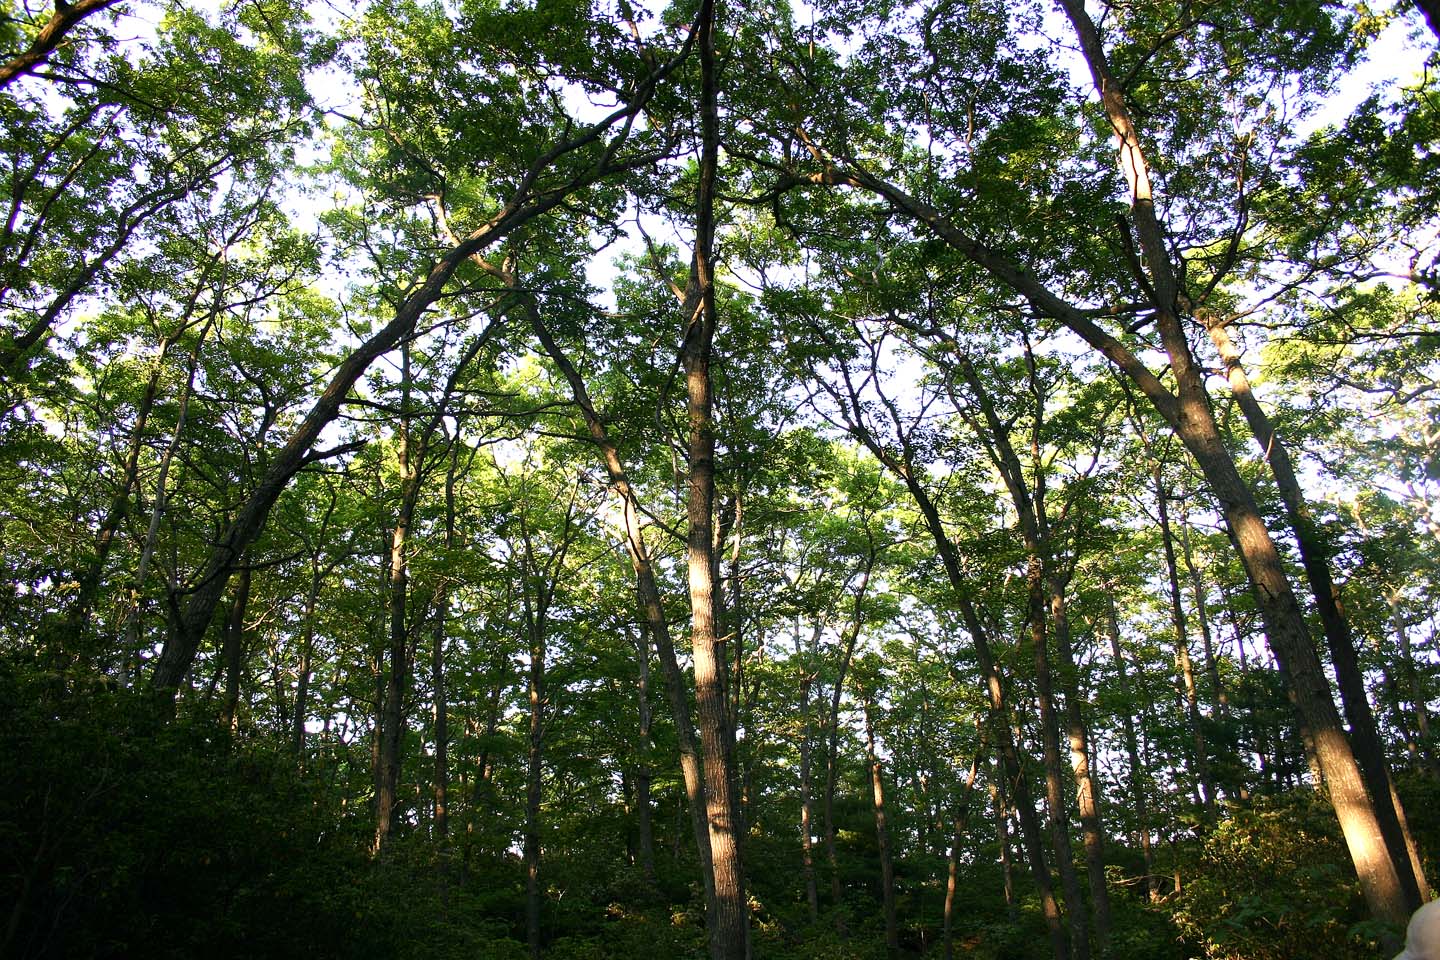 Photos of trees in the Moraine Preserve